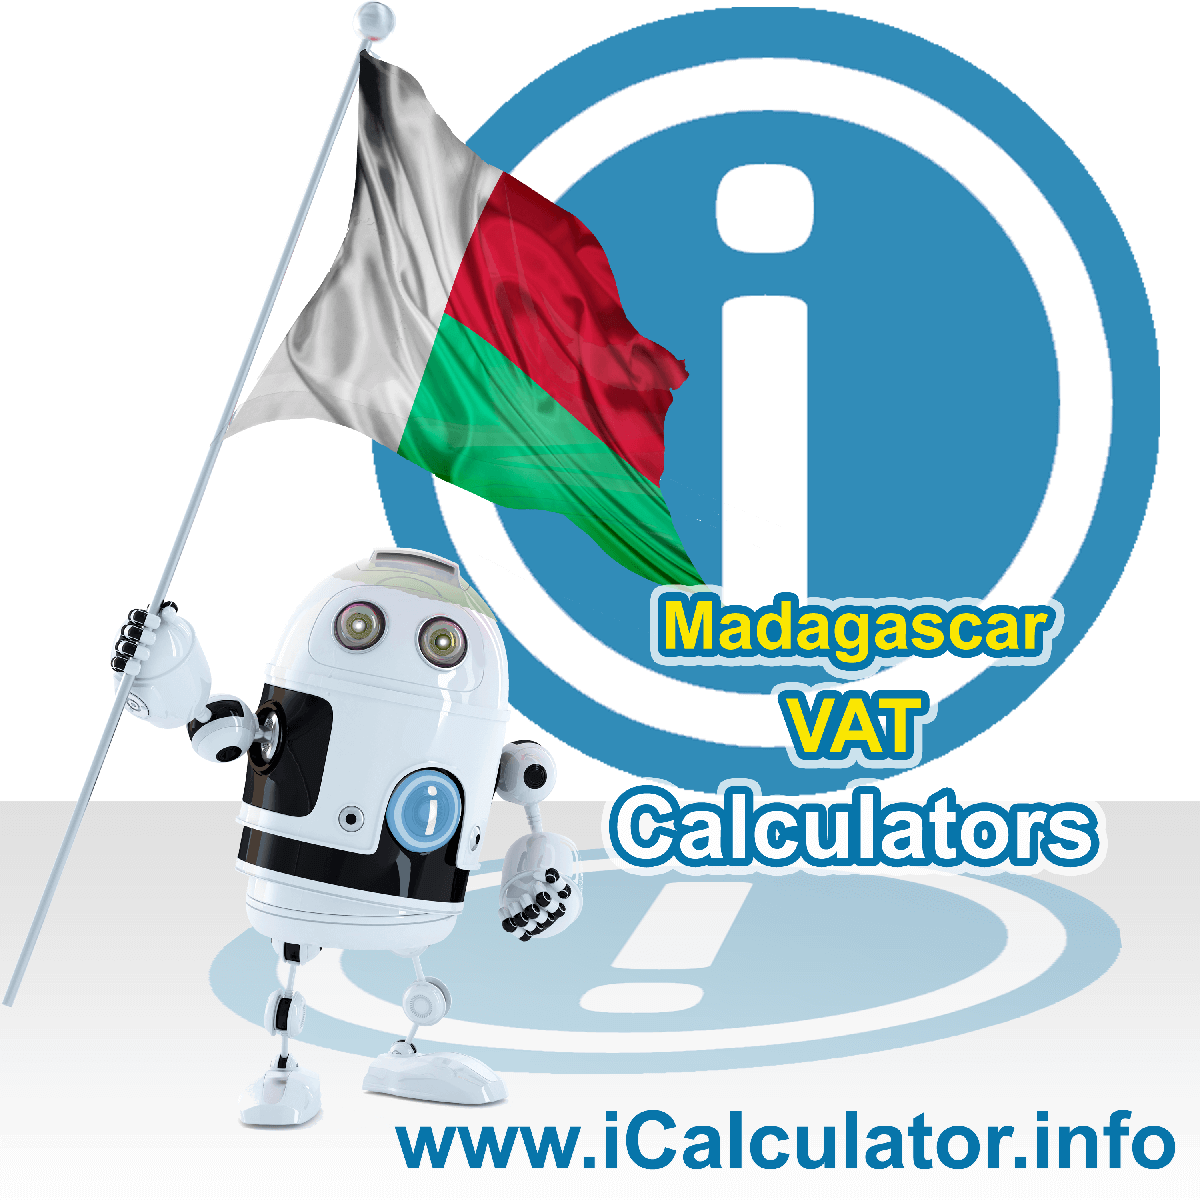 Madagascar VAT Calculator. This image shows the Madagascar flag and information relating to the VAT formula used for calculating Value Added Tax in Madagascar using the Madagascar VAT Calculator in 2023